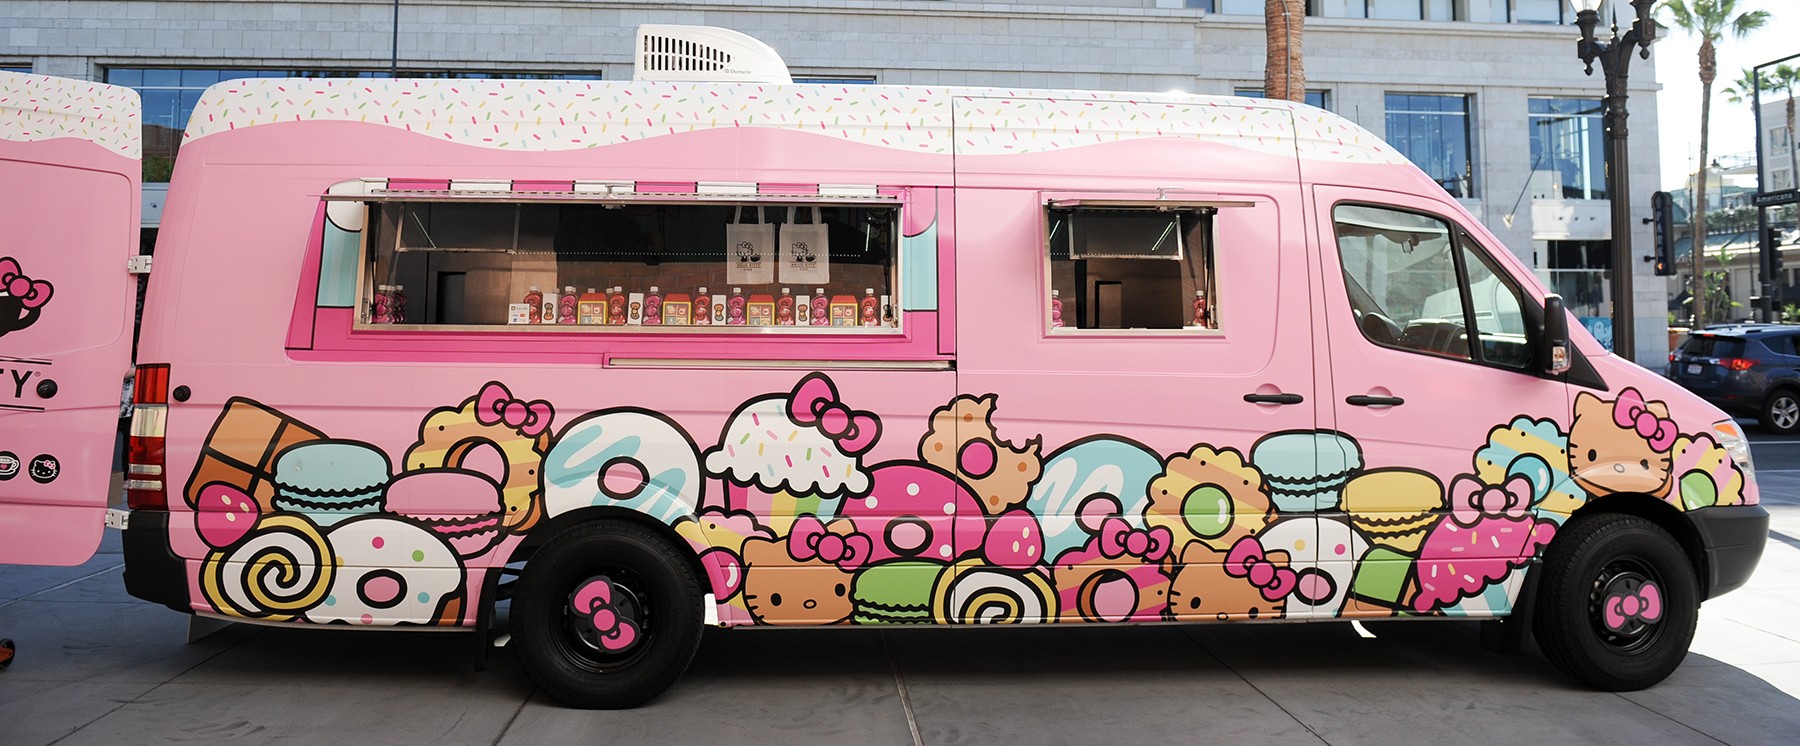 Hello Kitty Cafe Truck – Tampa, FL – Ainee's Blog of Happy Food